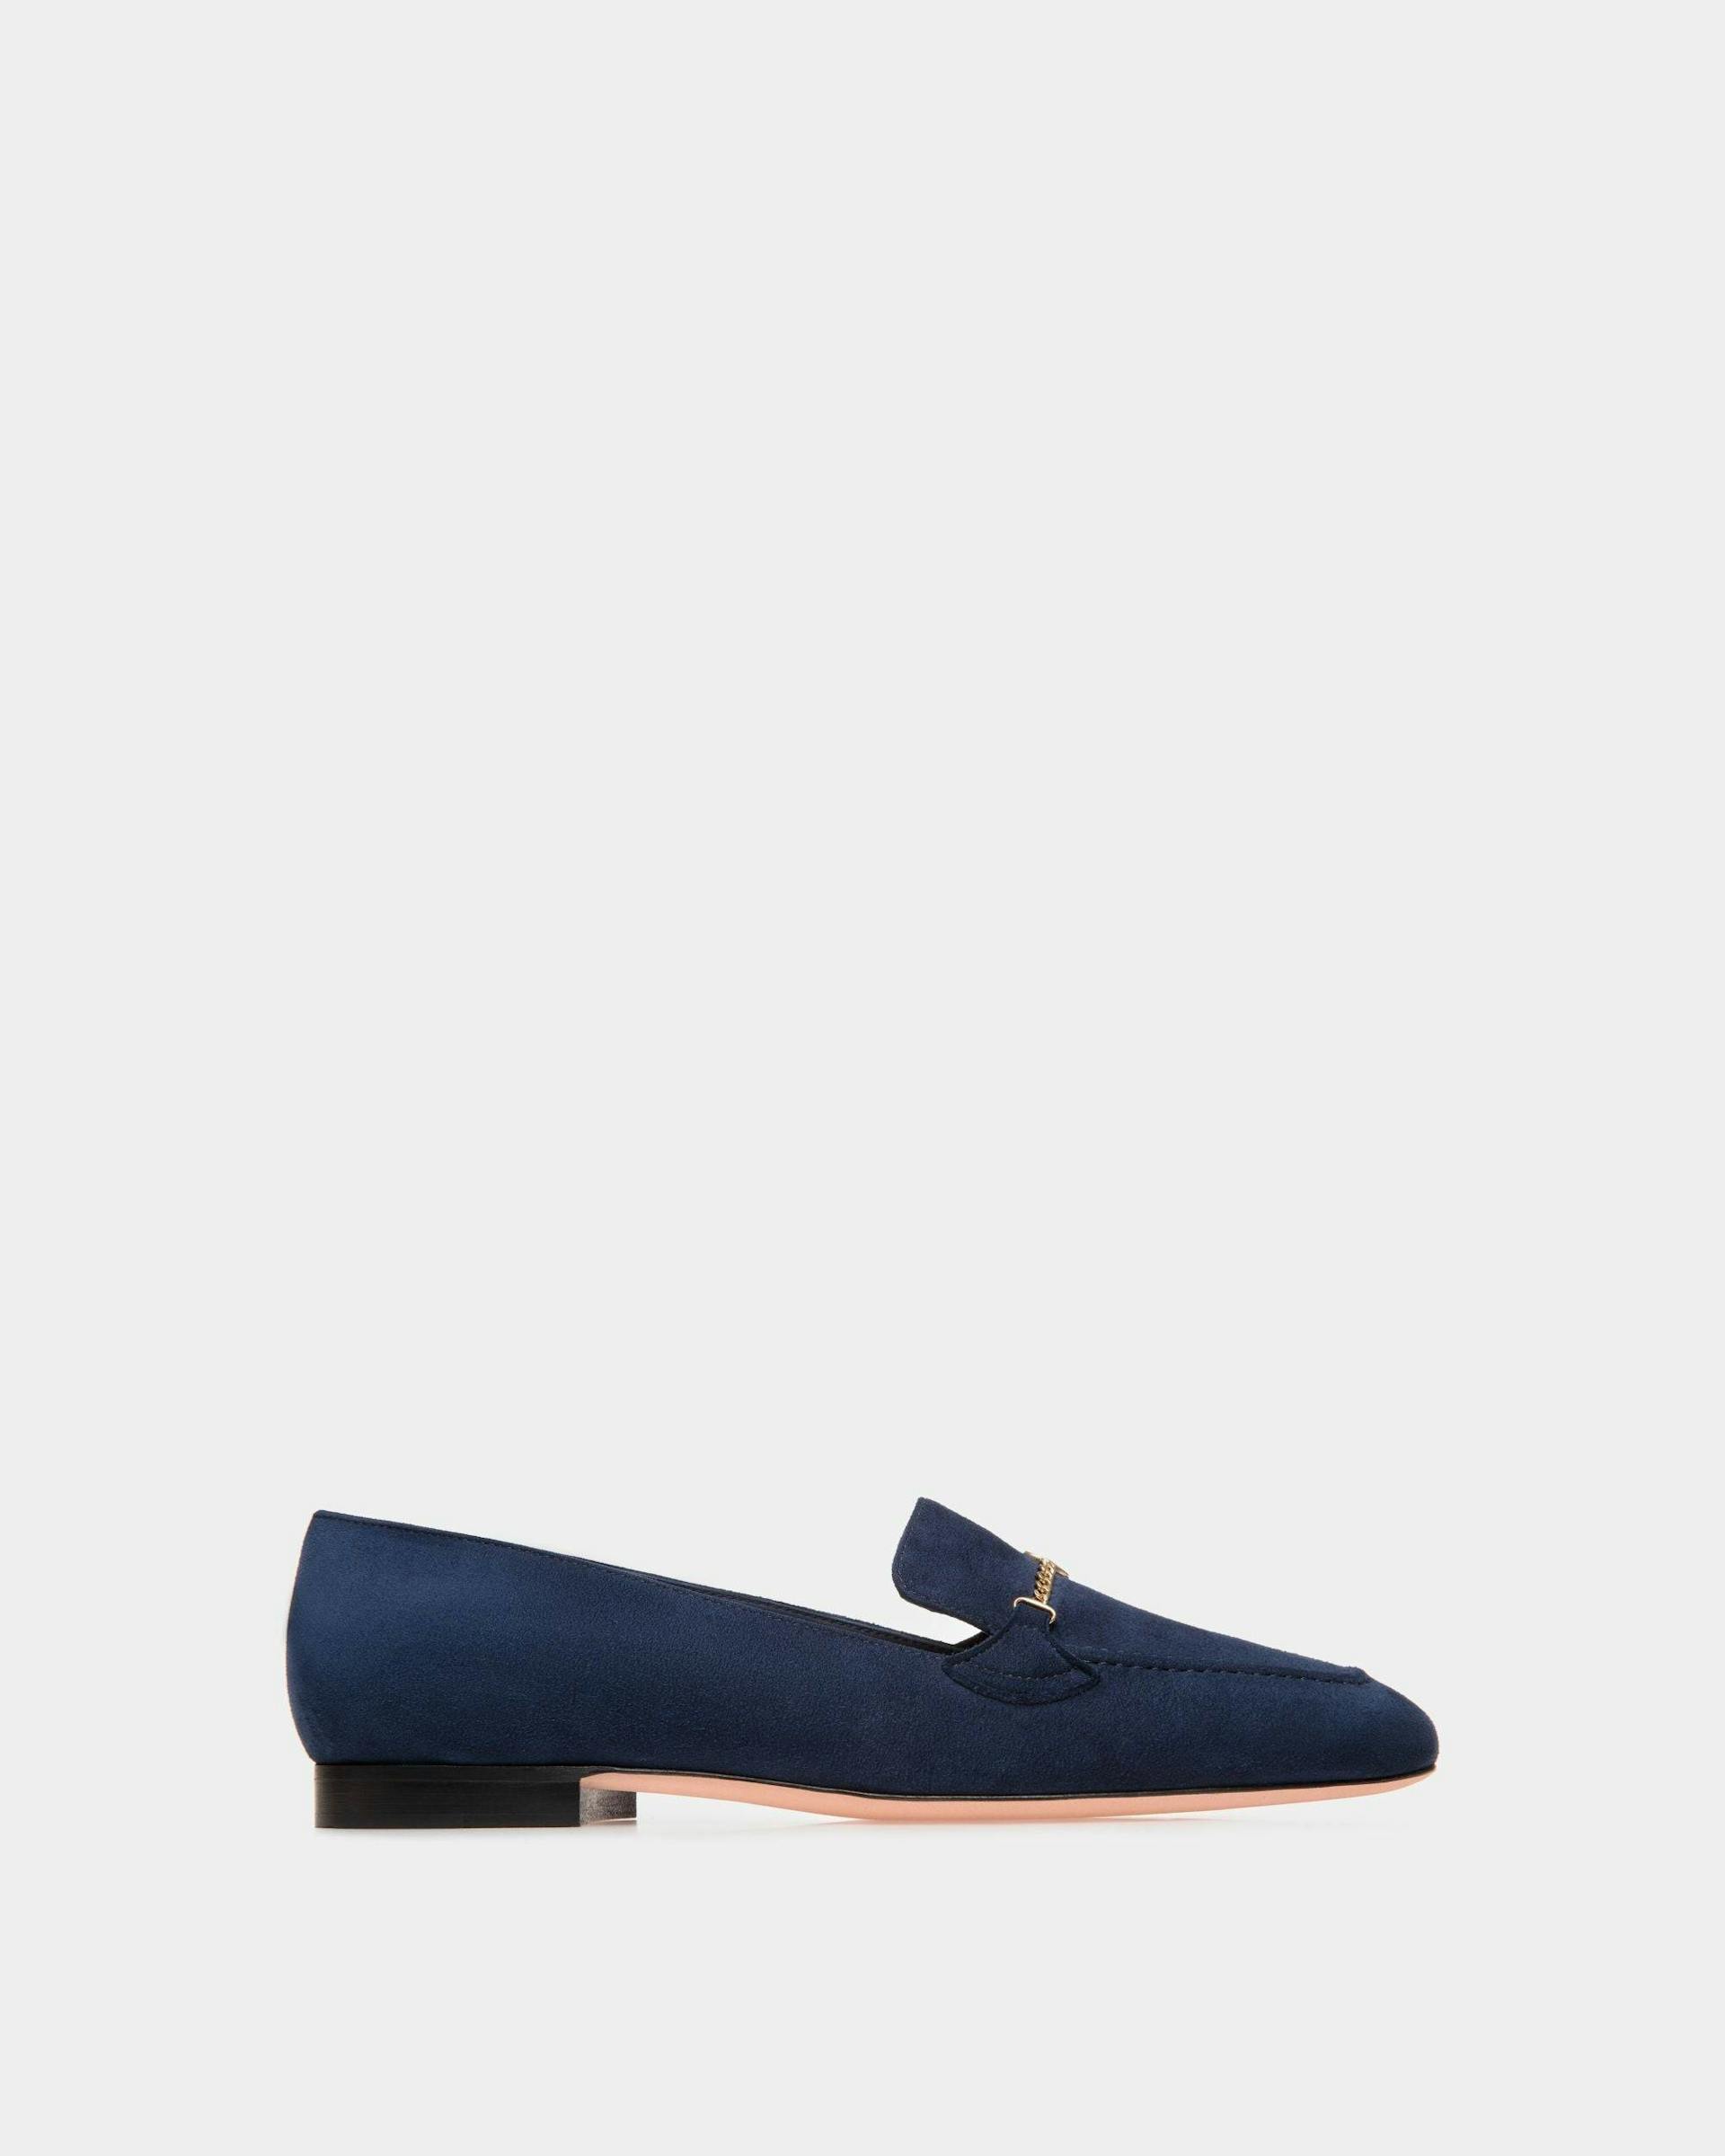 Daily Emblem | Women's Loafer in Blue Suede | Bally